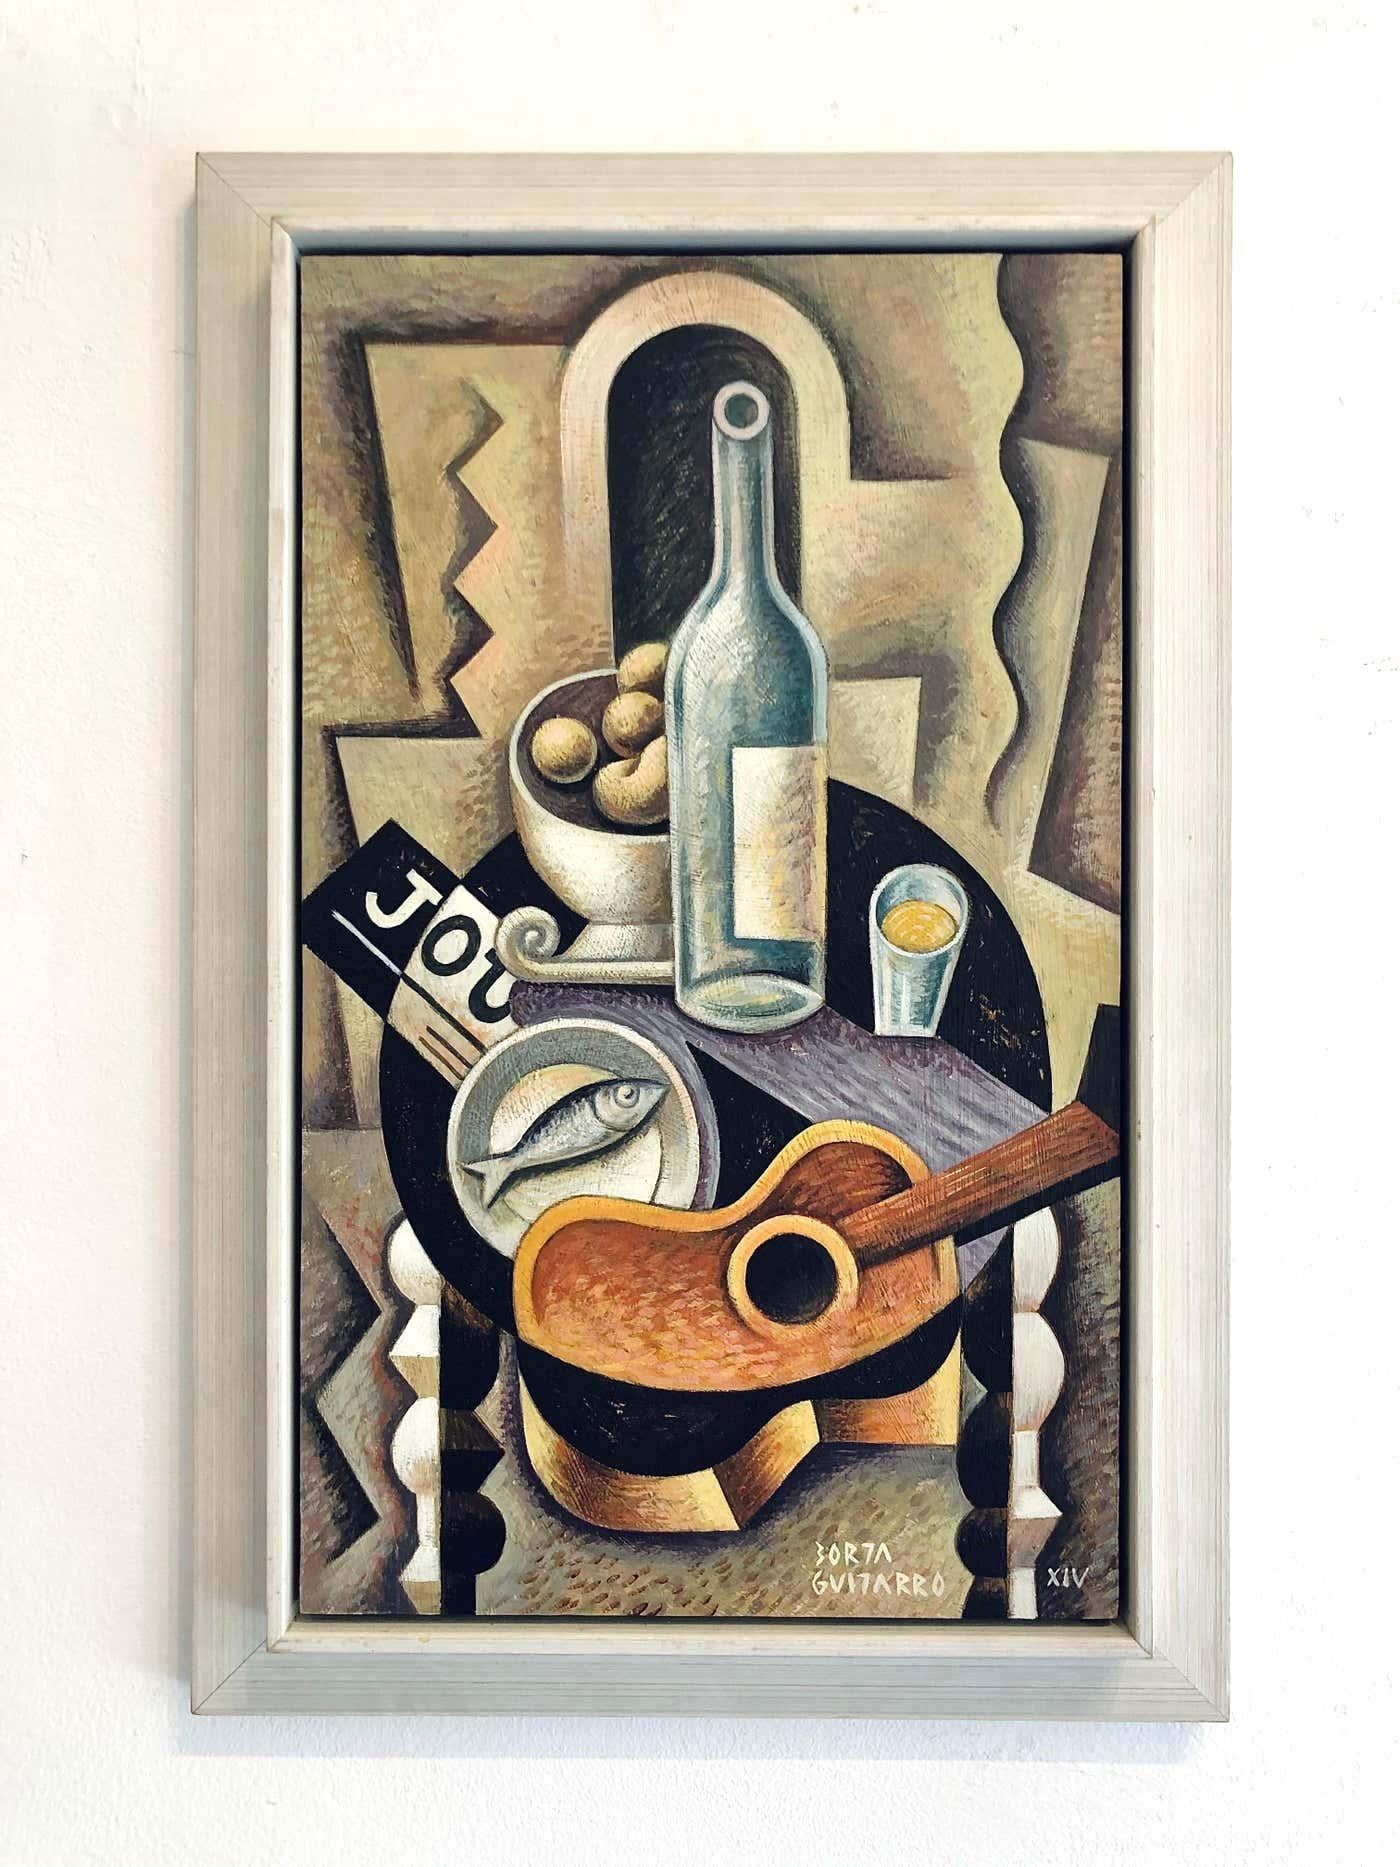 Still Life with guitar II-original cubism abstract painting-contemporary Art - Painting by Borja Guijarro